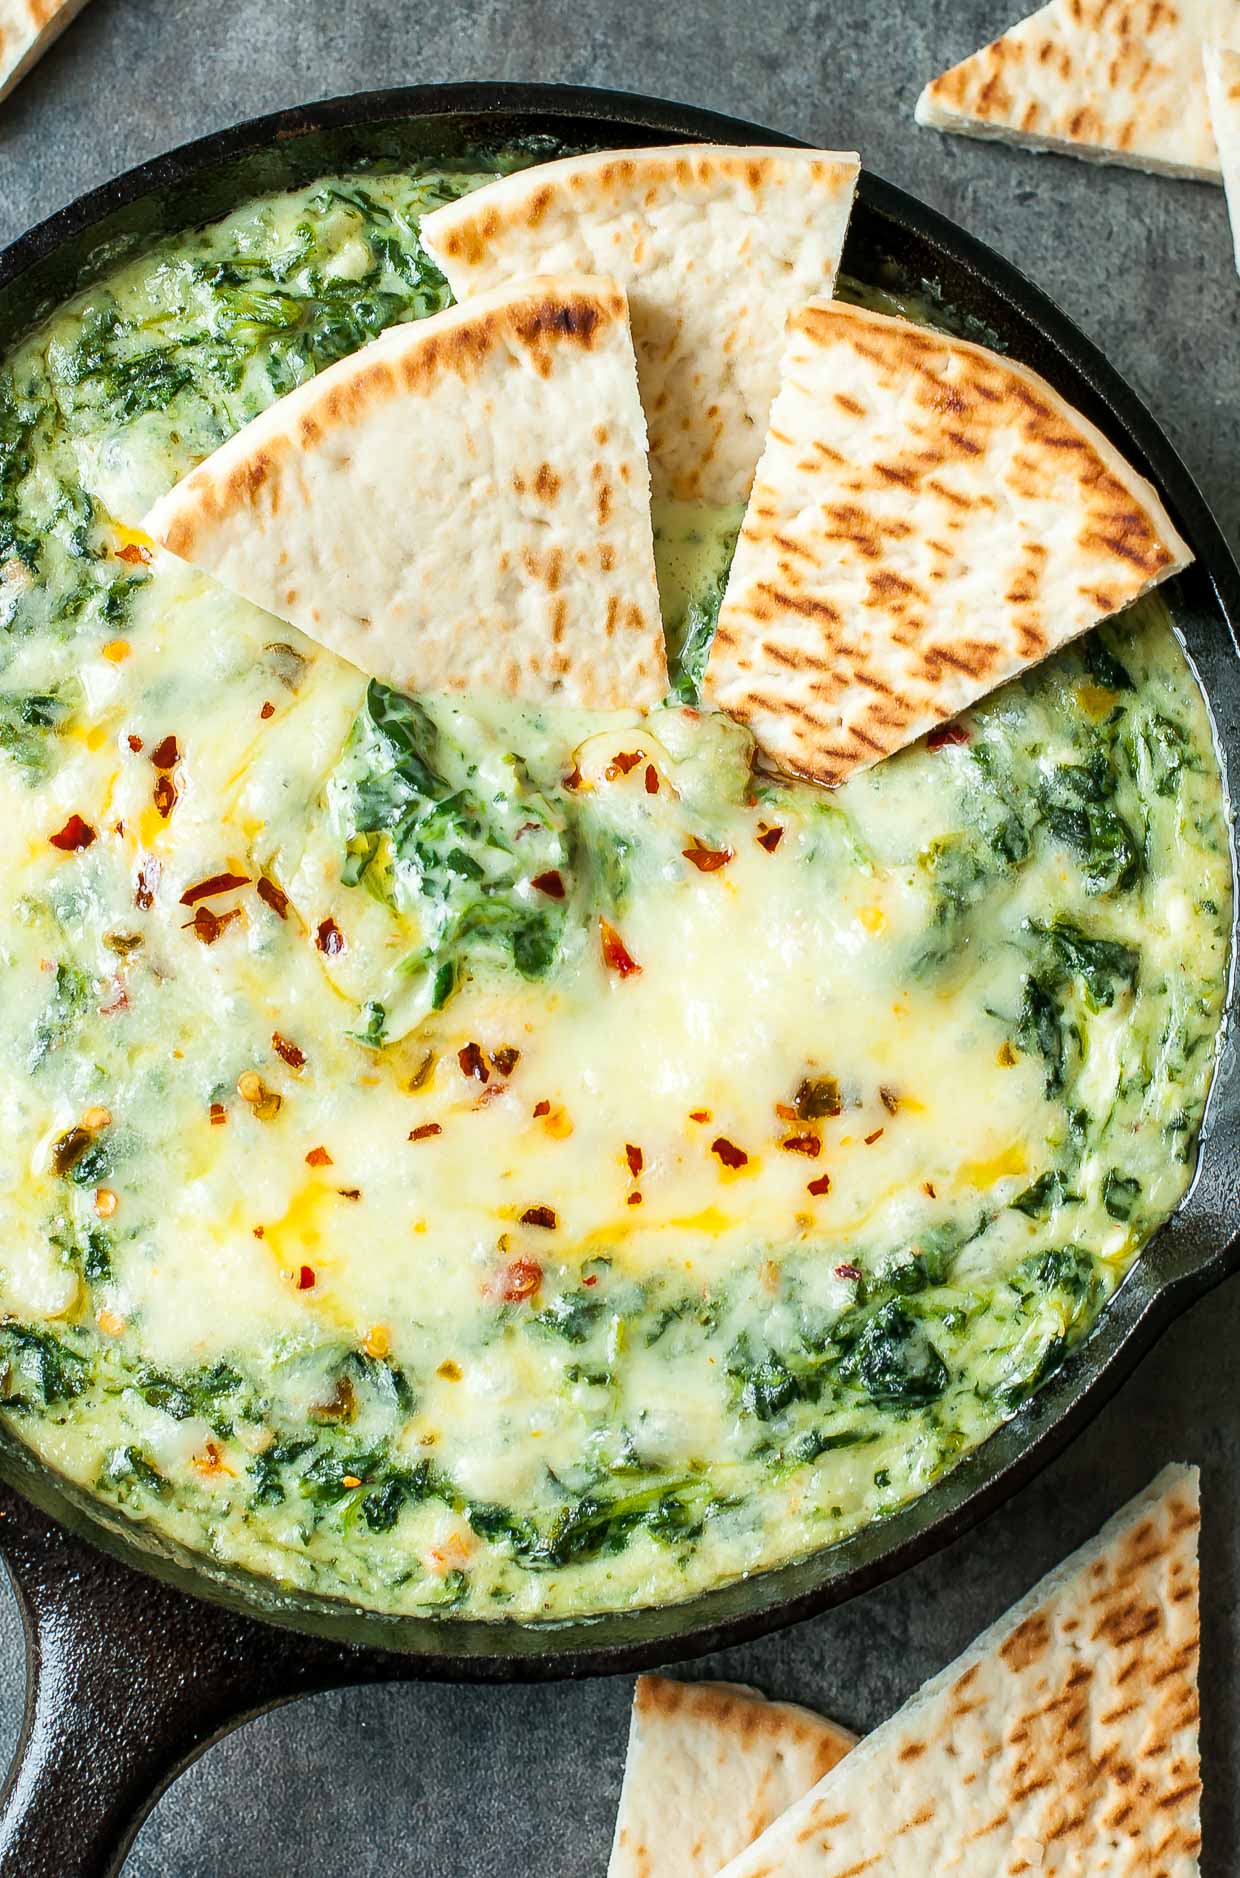 Serve this Cheesy Baked Shrimp and Spinach Dip at your next party and it's sure to be the first dish devoured! My friends and family BEG for this easy cheesy appetizer!